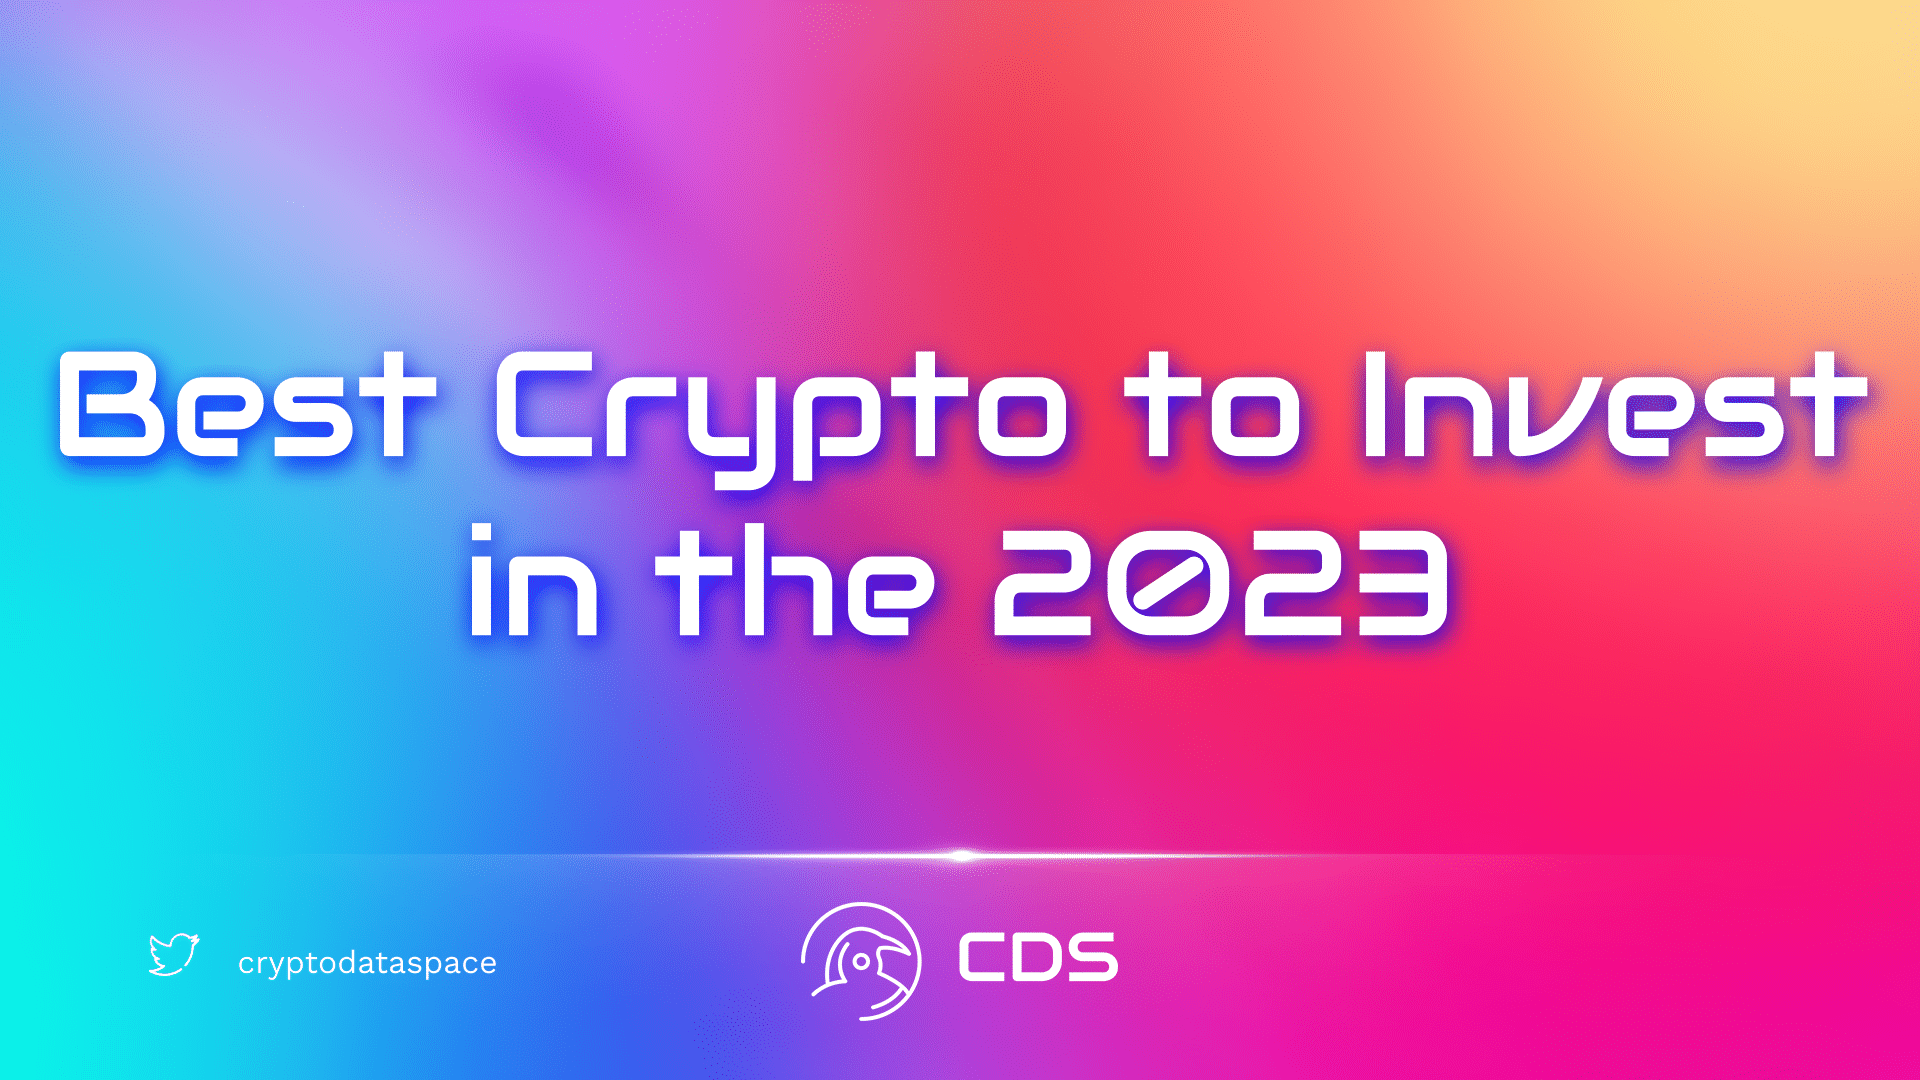 Best Crypto to Invest in 2023